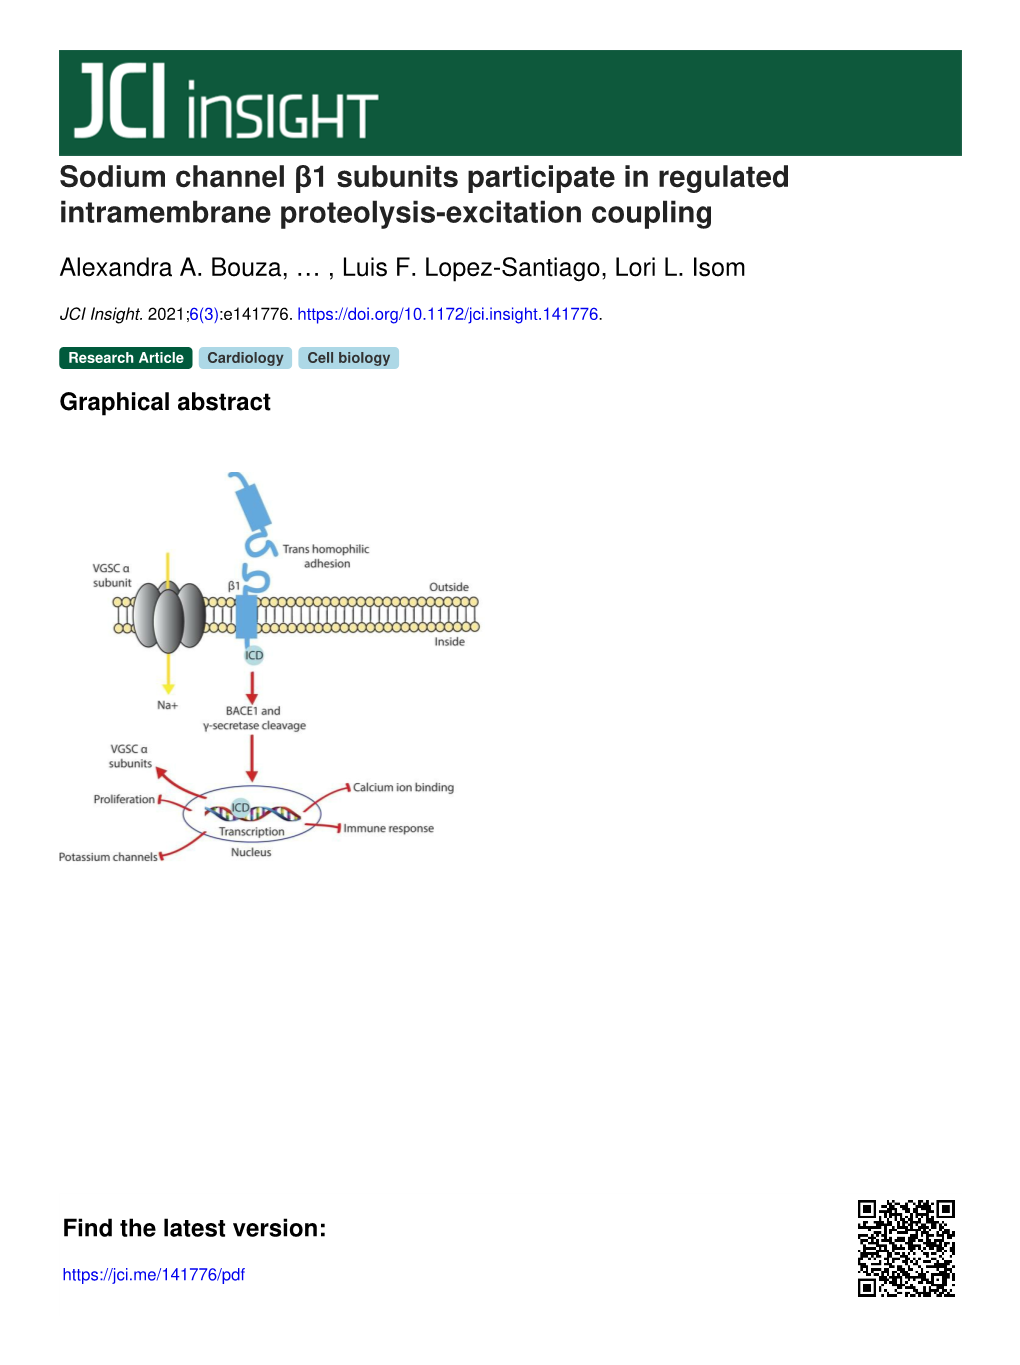 Sodium Channel Β1 Subunits Participate in Regulated Intramembrane Proteolysis-Excitation Coupling